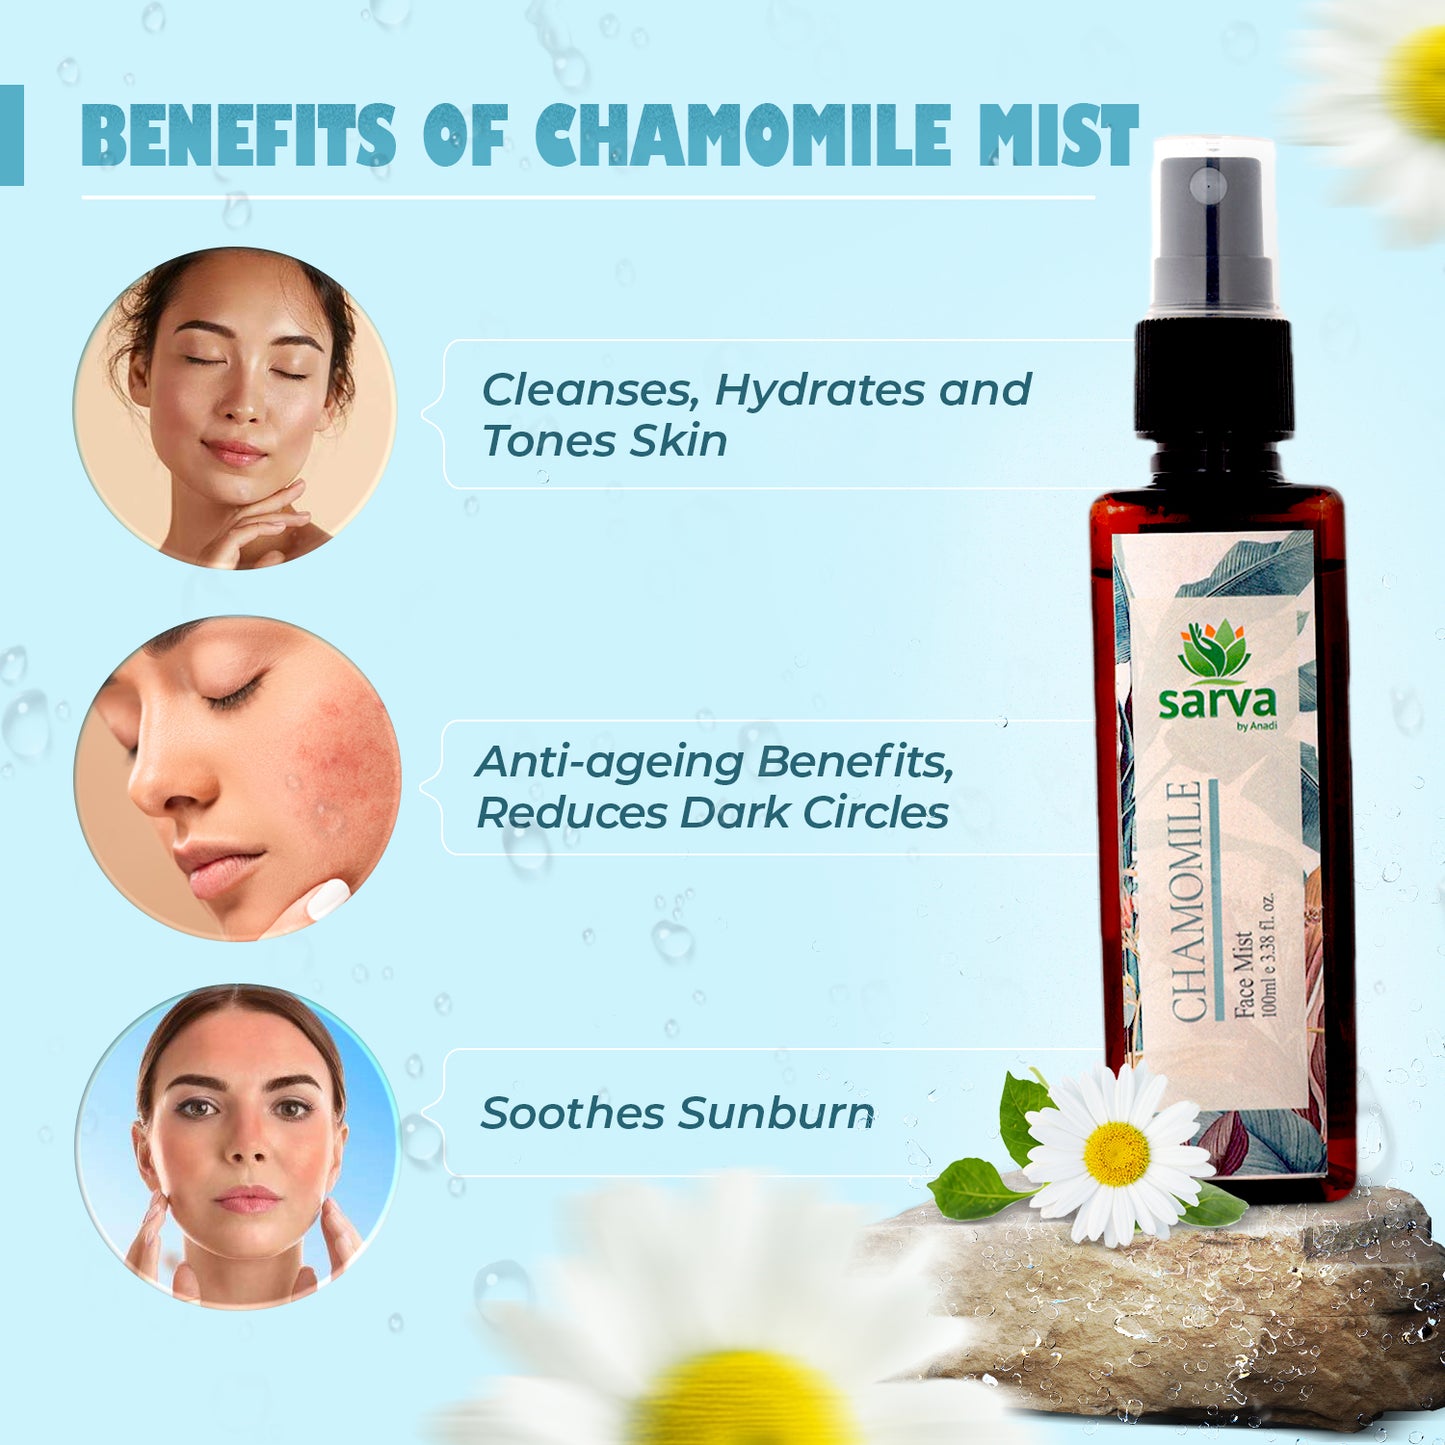 Chamomile Mist | Steam Distilled Hydrosol | Soothing & Calming